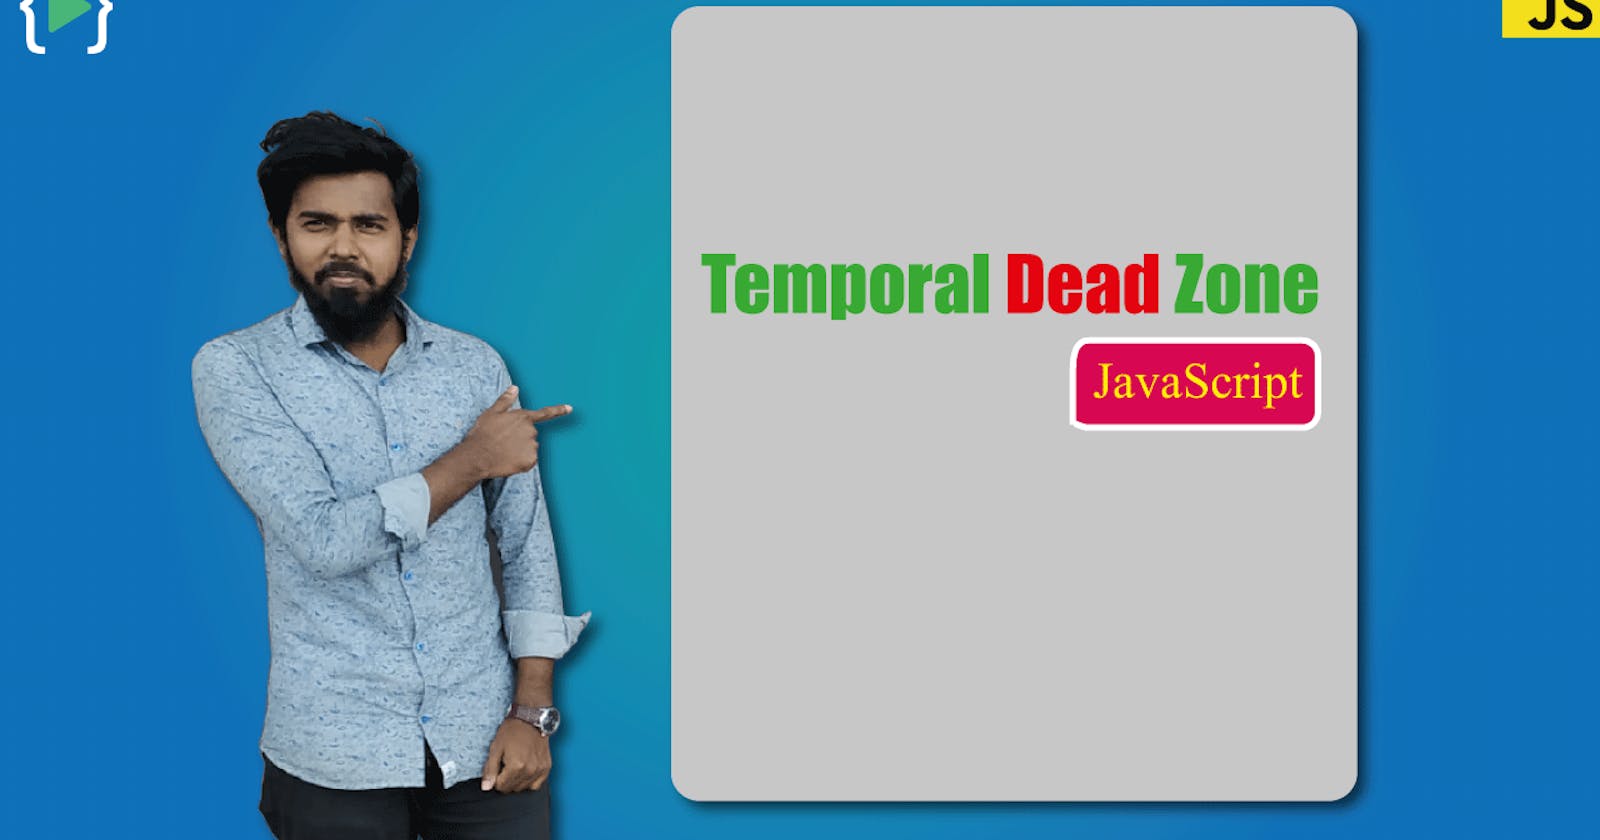 What is Temporal dead zone?